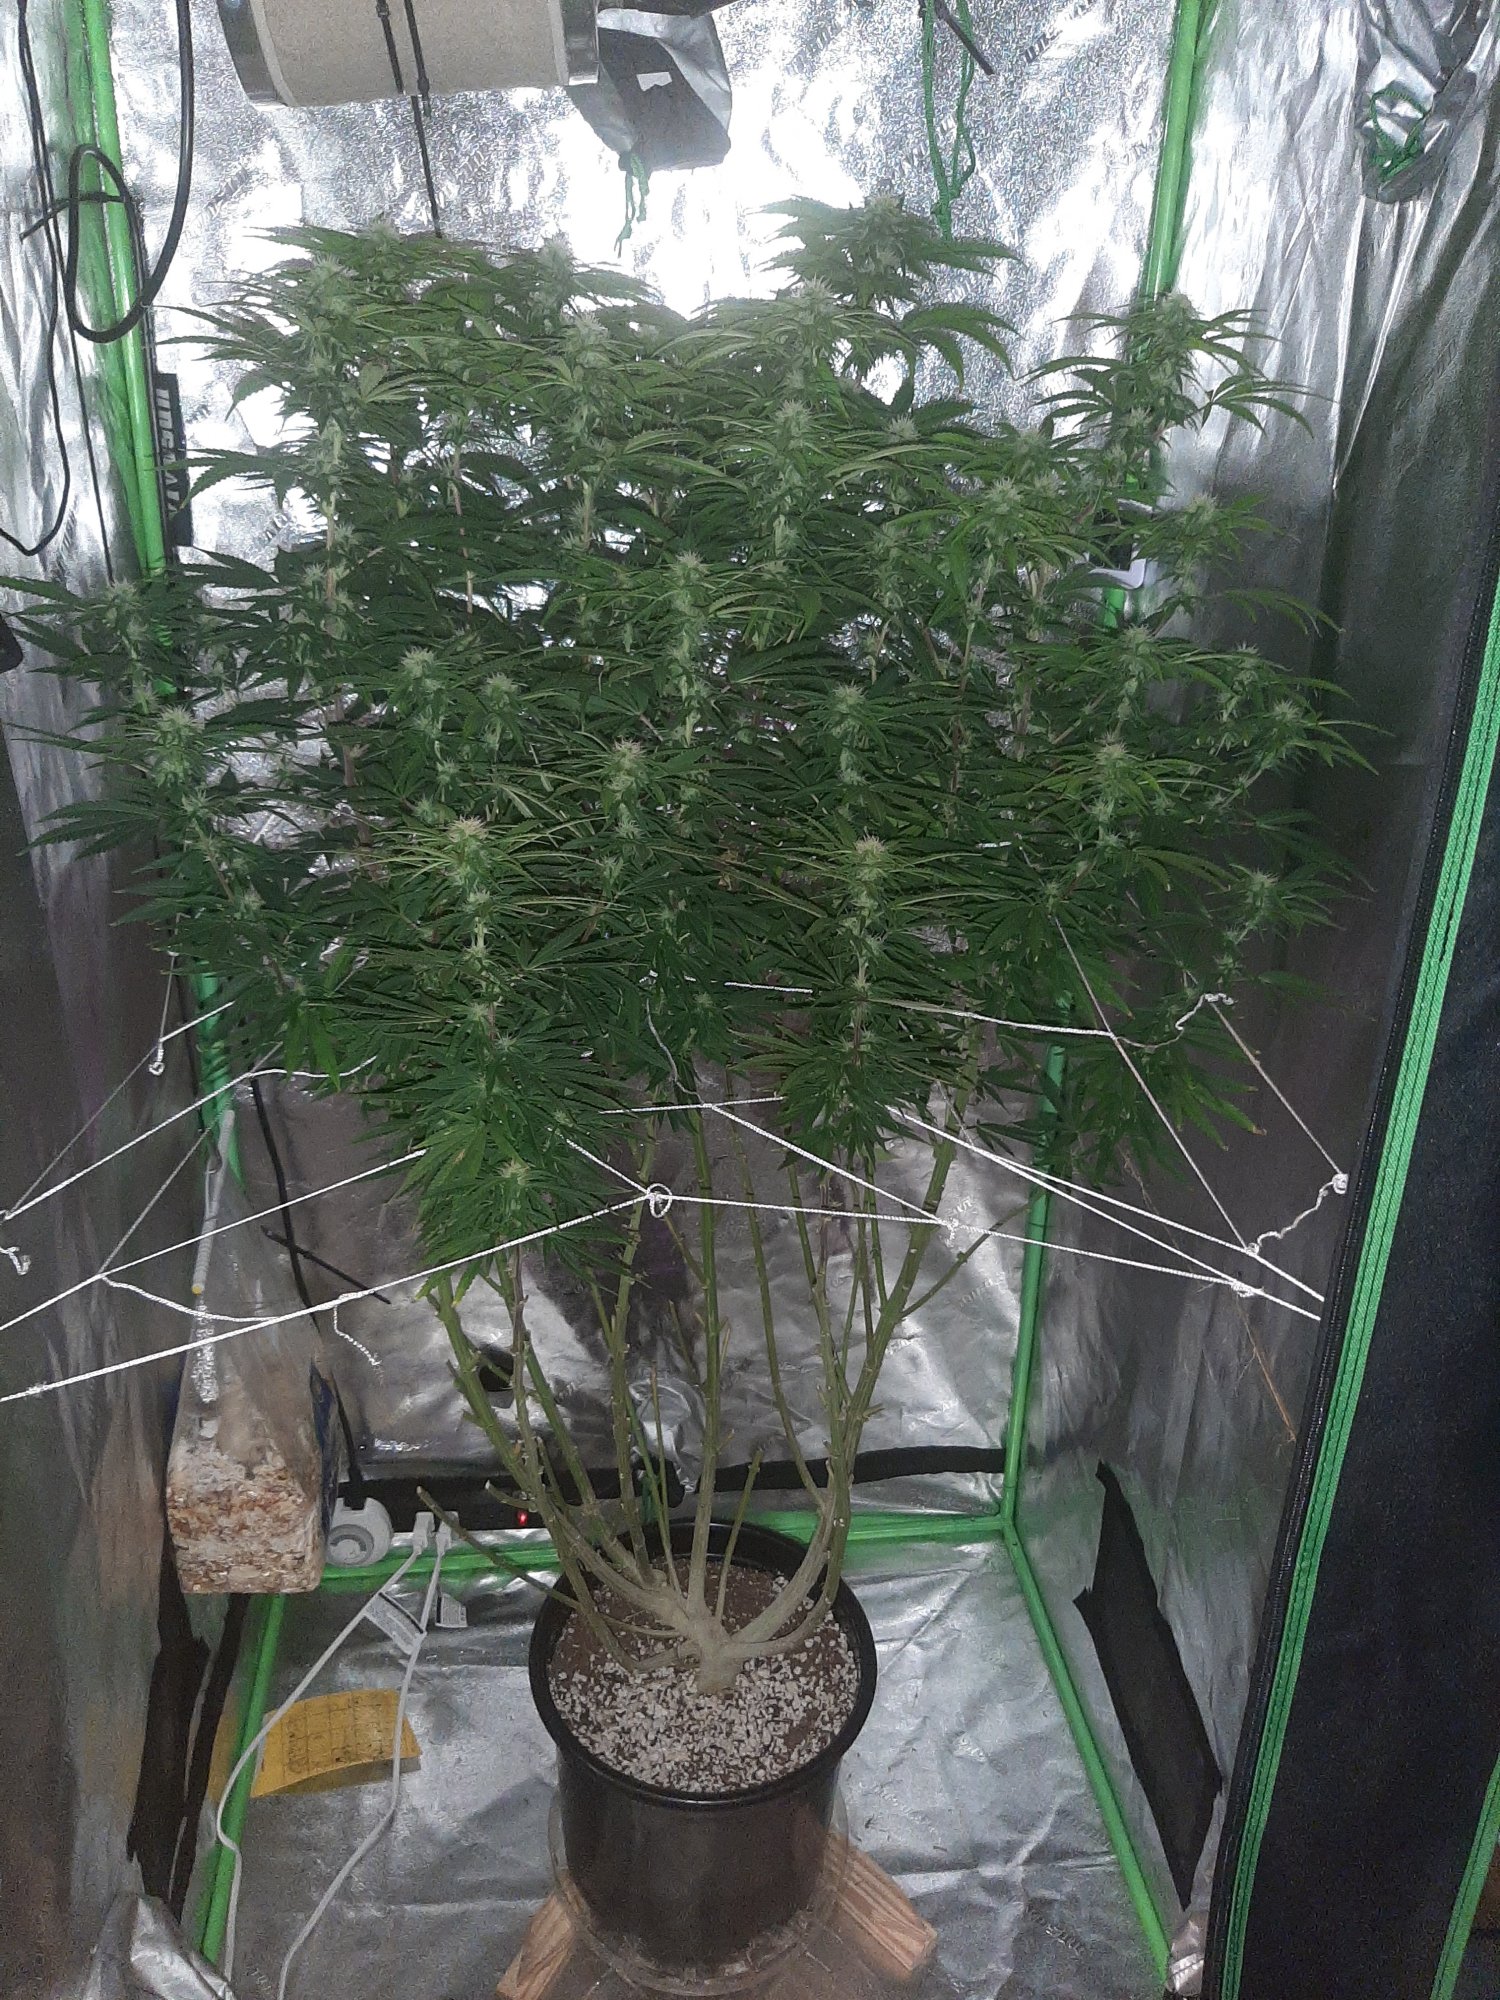 Northern lighta auto wayyy past due several questions 3